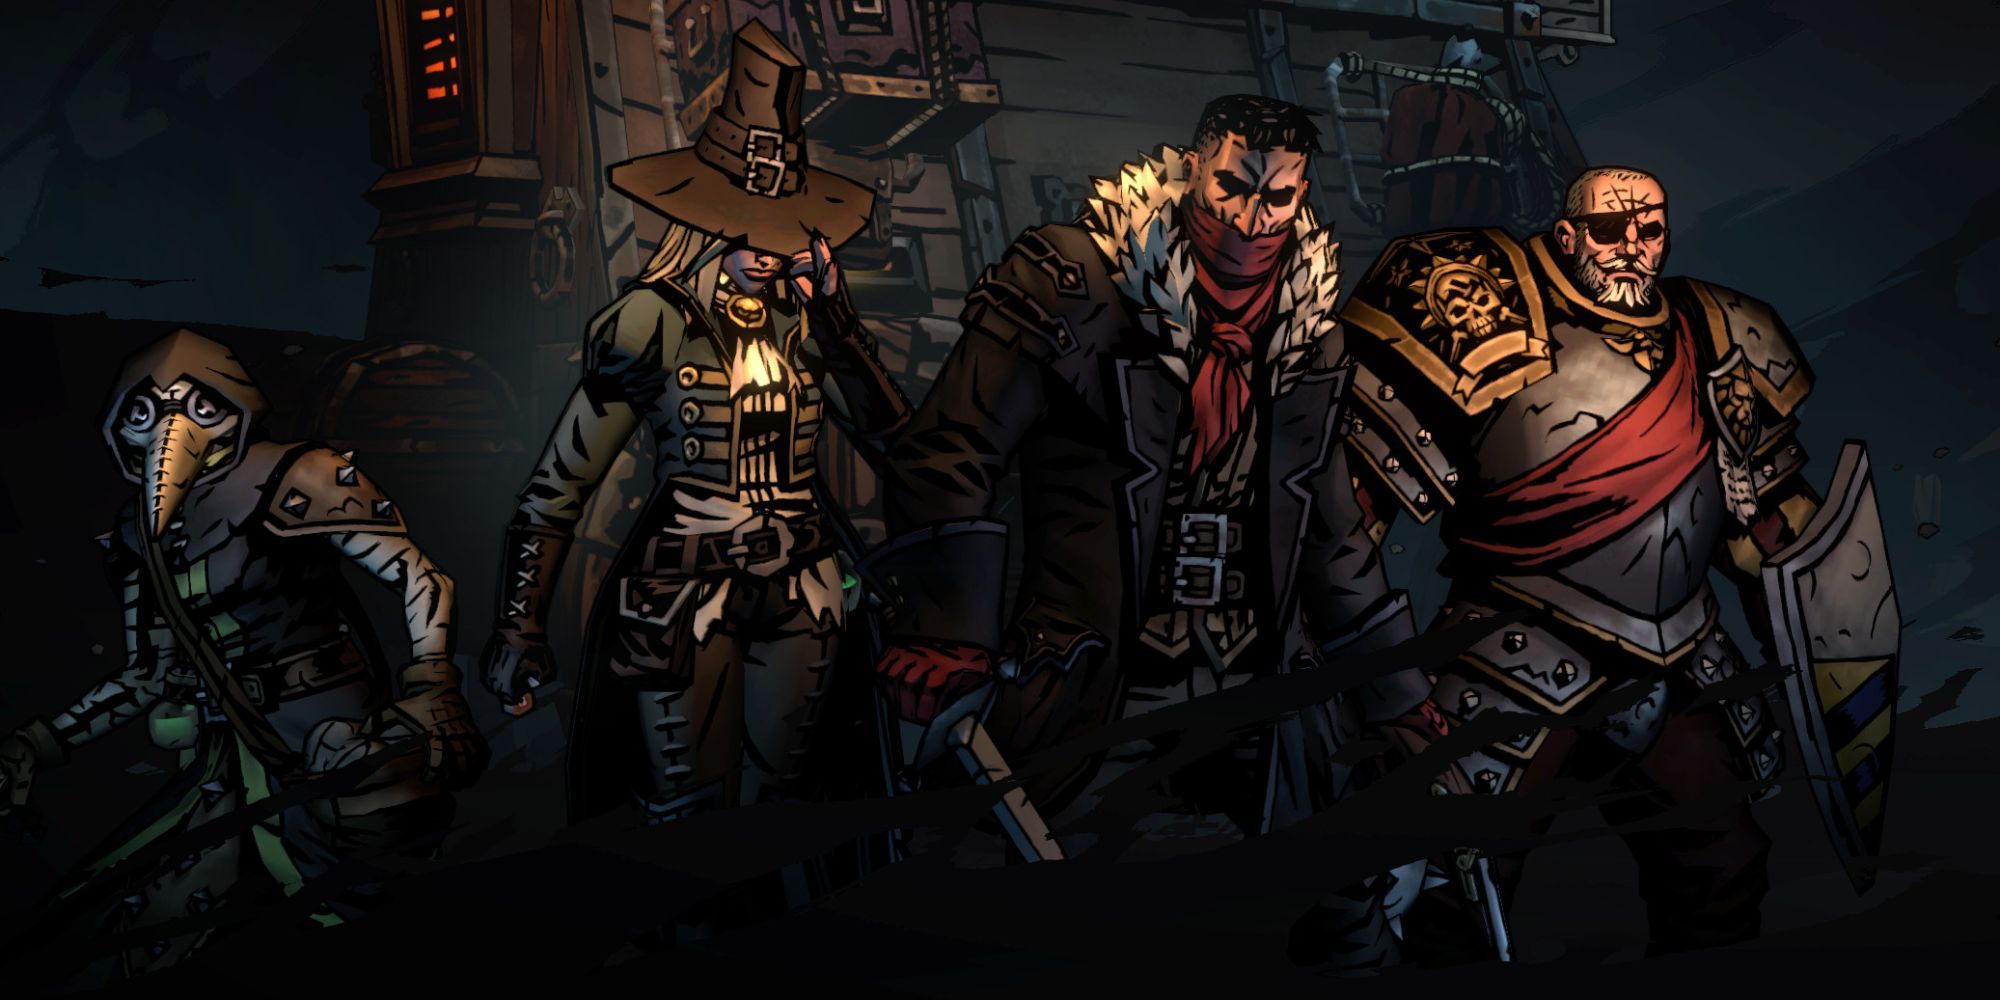 Darkest Dungeon 2 Plague Doctor Tomb Robber Man with weapon and bandit all standing by cart.